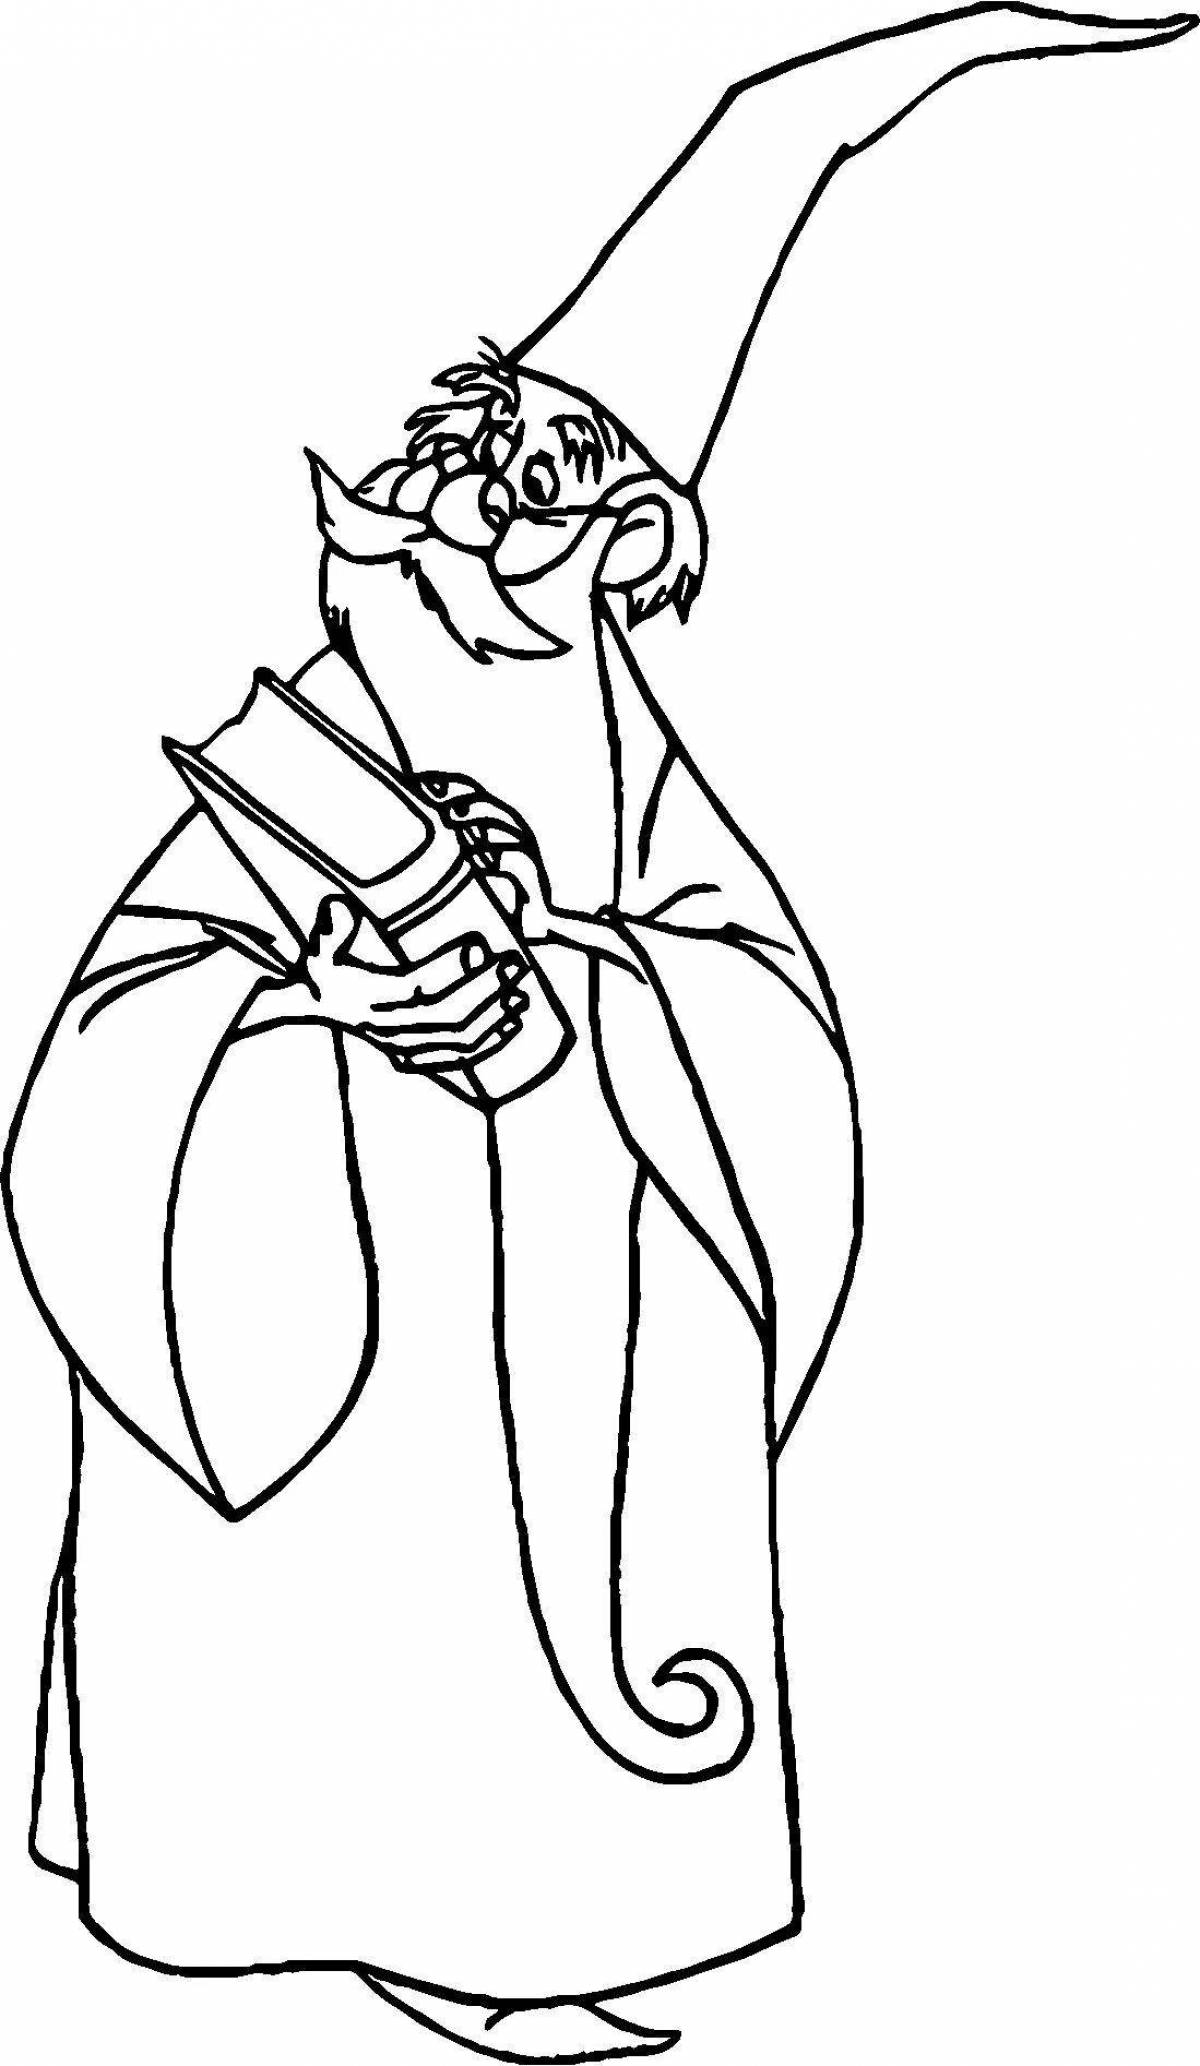 Coloring book outstanding sorcerer